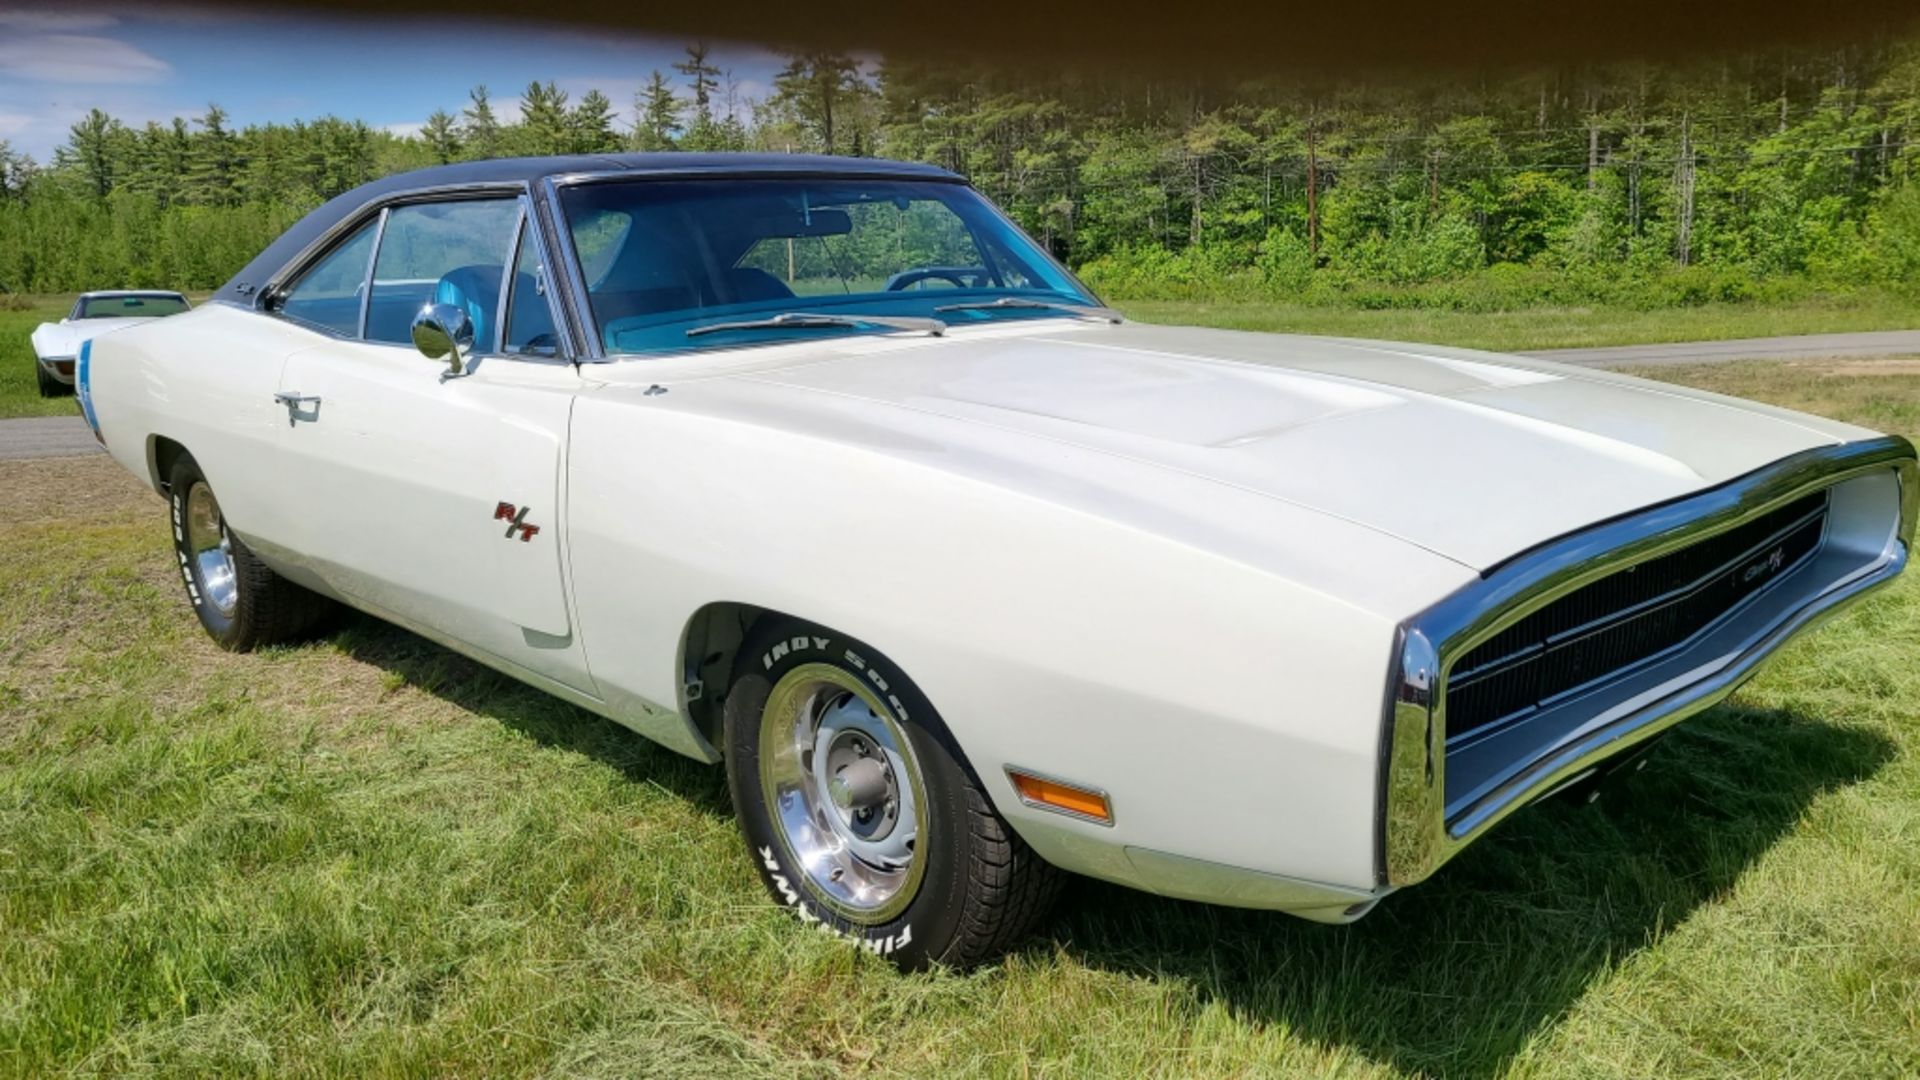 1970 Dodge Charger Rt - Image 2 of 24